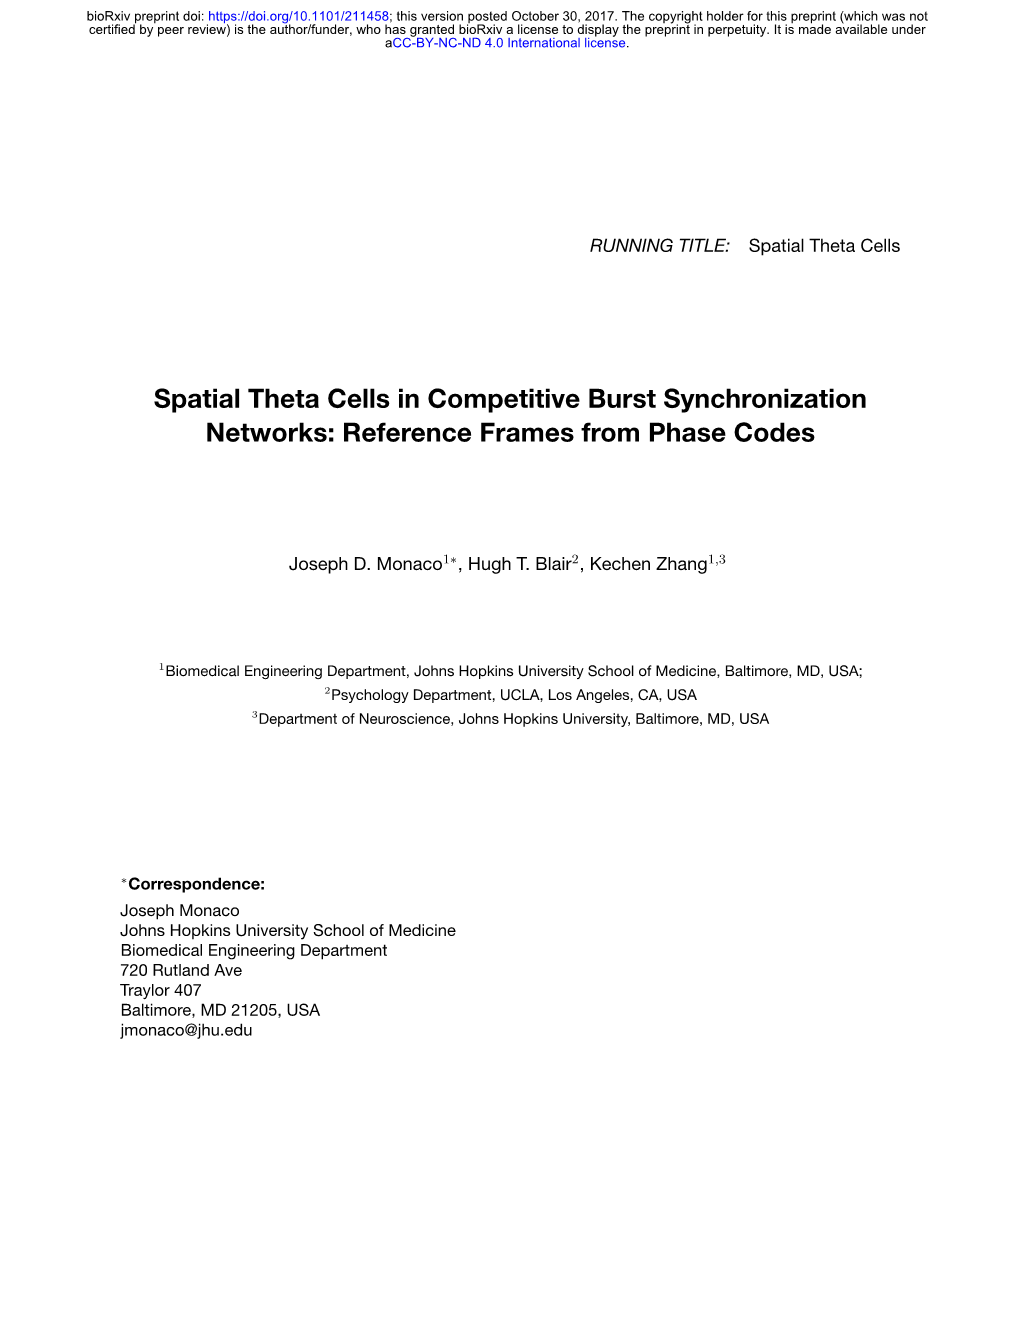 Spatial Theta Cells in Competitive Burst Synchronization Networks: Reference Frames from Phase Codes